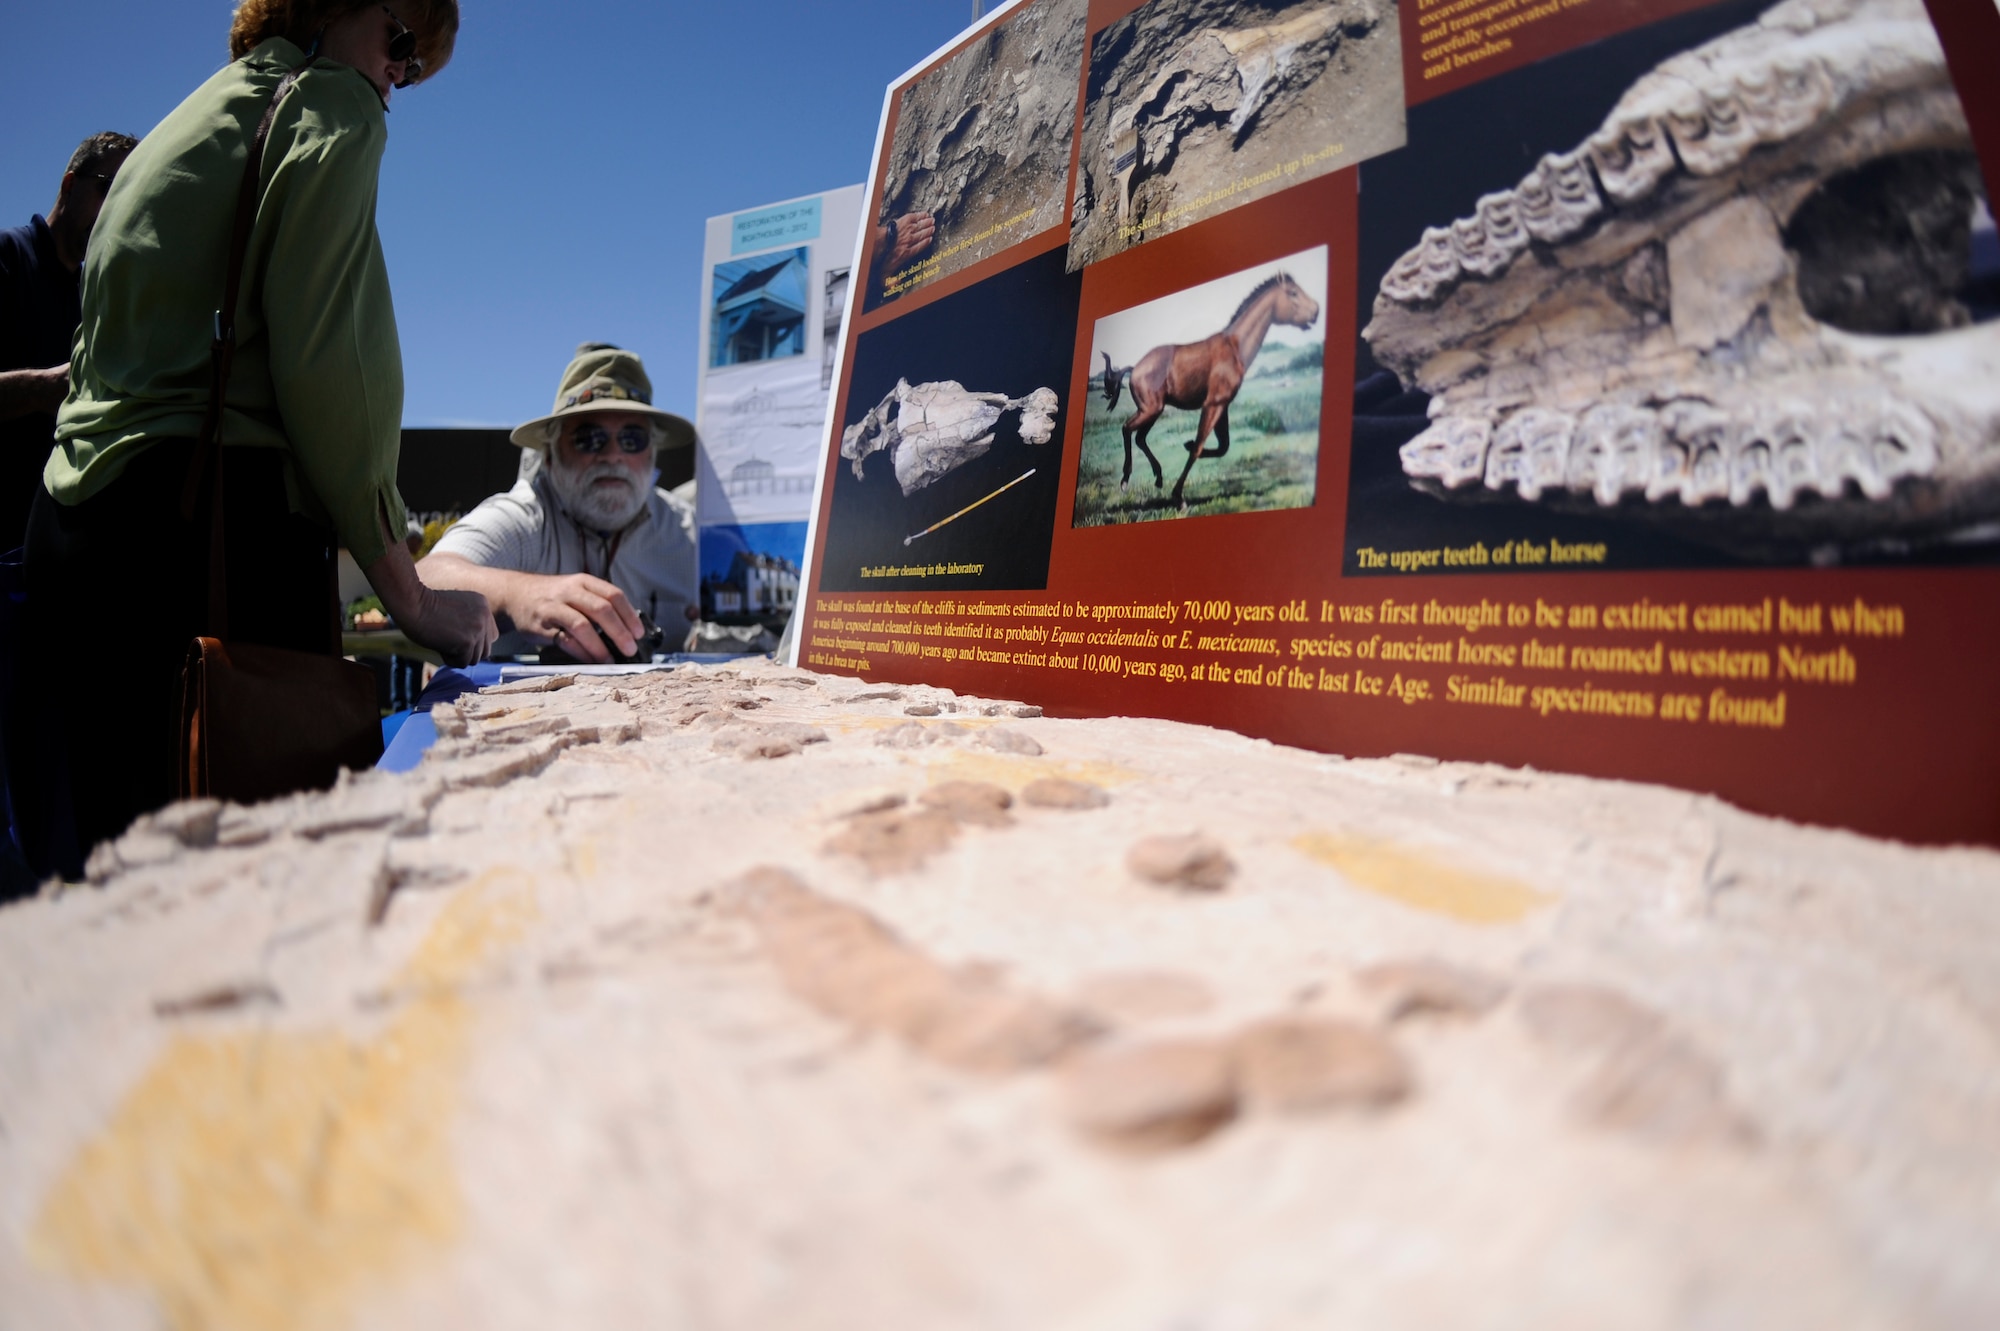 Dr. James Carucci shows base members information on the boat house revitalization project during an Earth Day event at Vandenberg Air Force Base, Calif., April 18, 2012. Carucci is a 30th Civil Engineer Squadron archaeologist. (U.S. Air Force photo/Staff Sgt. Andrew Satran)